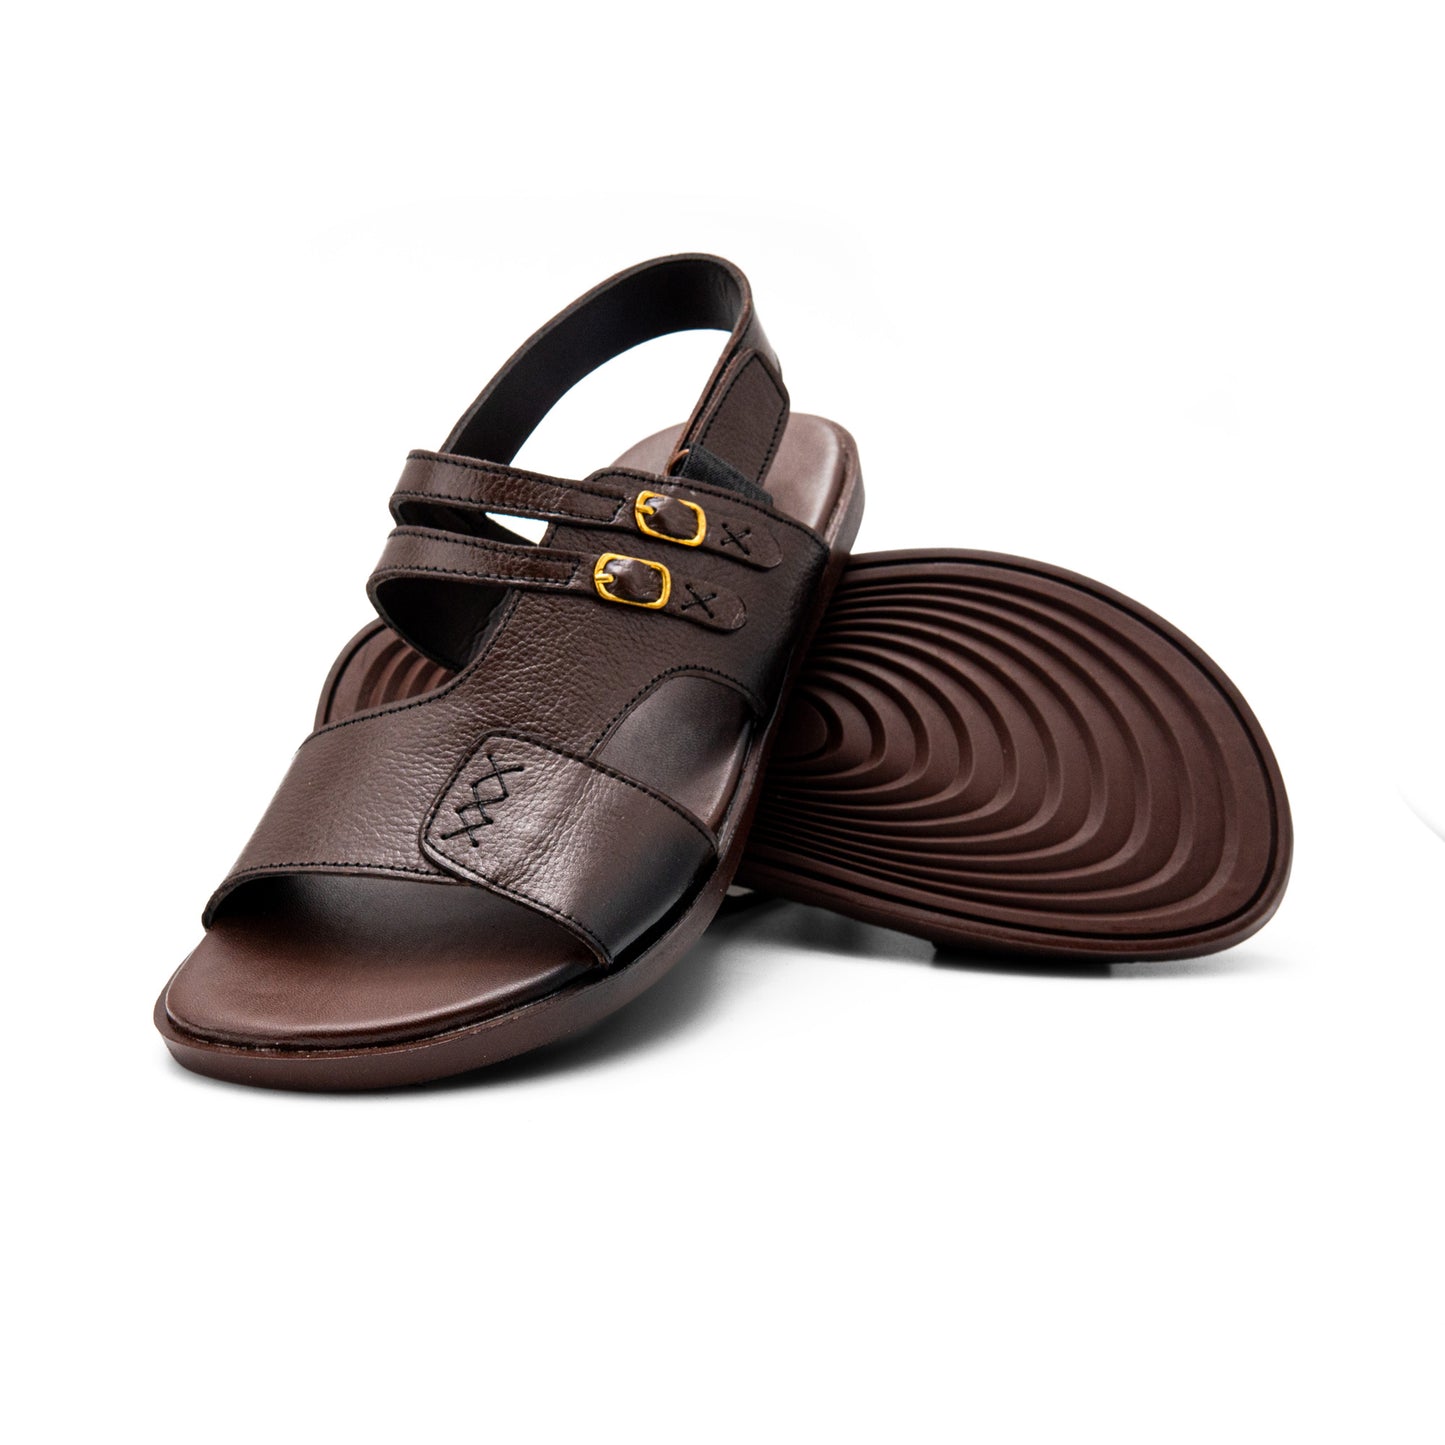 Double Buckle Brown Leather Sandals